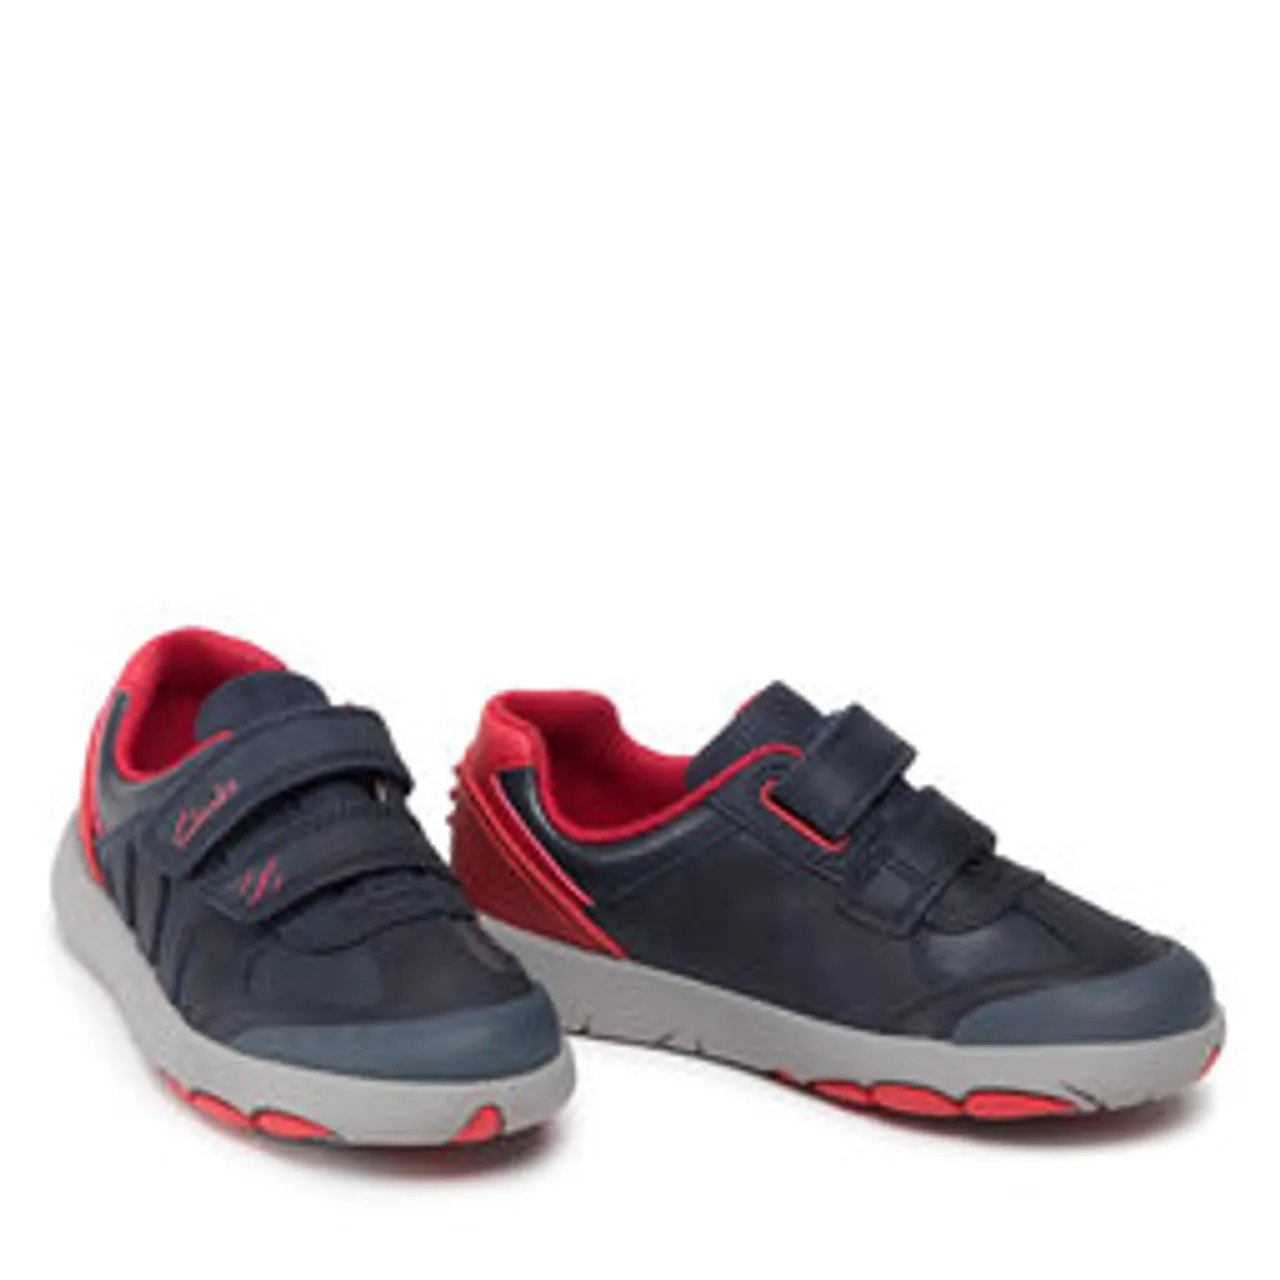 Sneakers Clarks Rex Play K 261619306 Navy/Red Leather